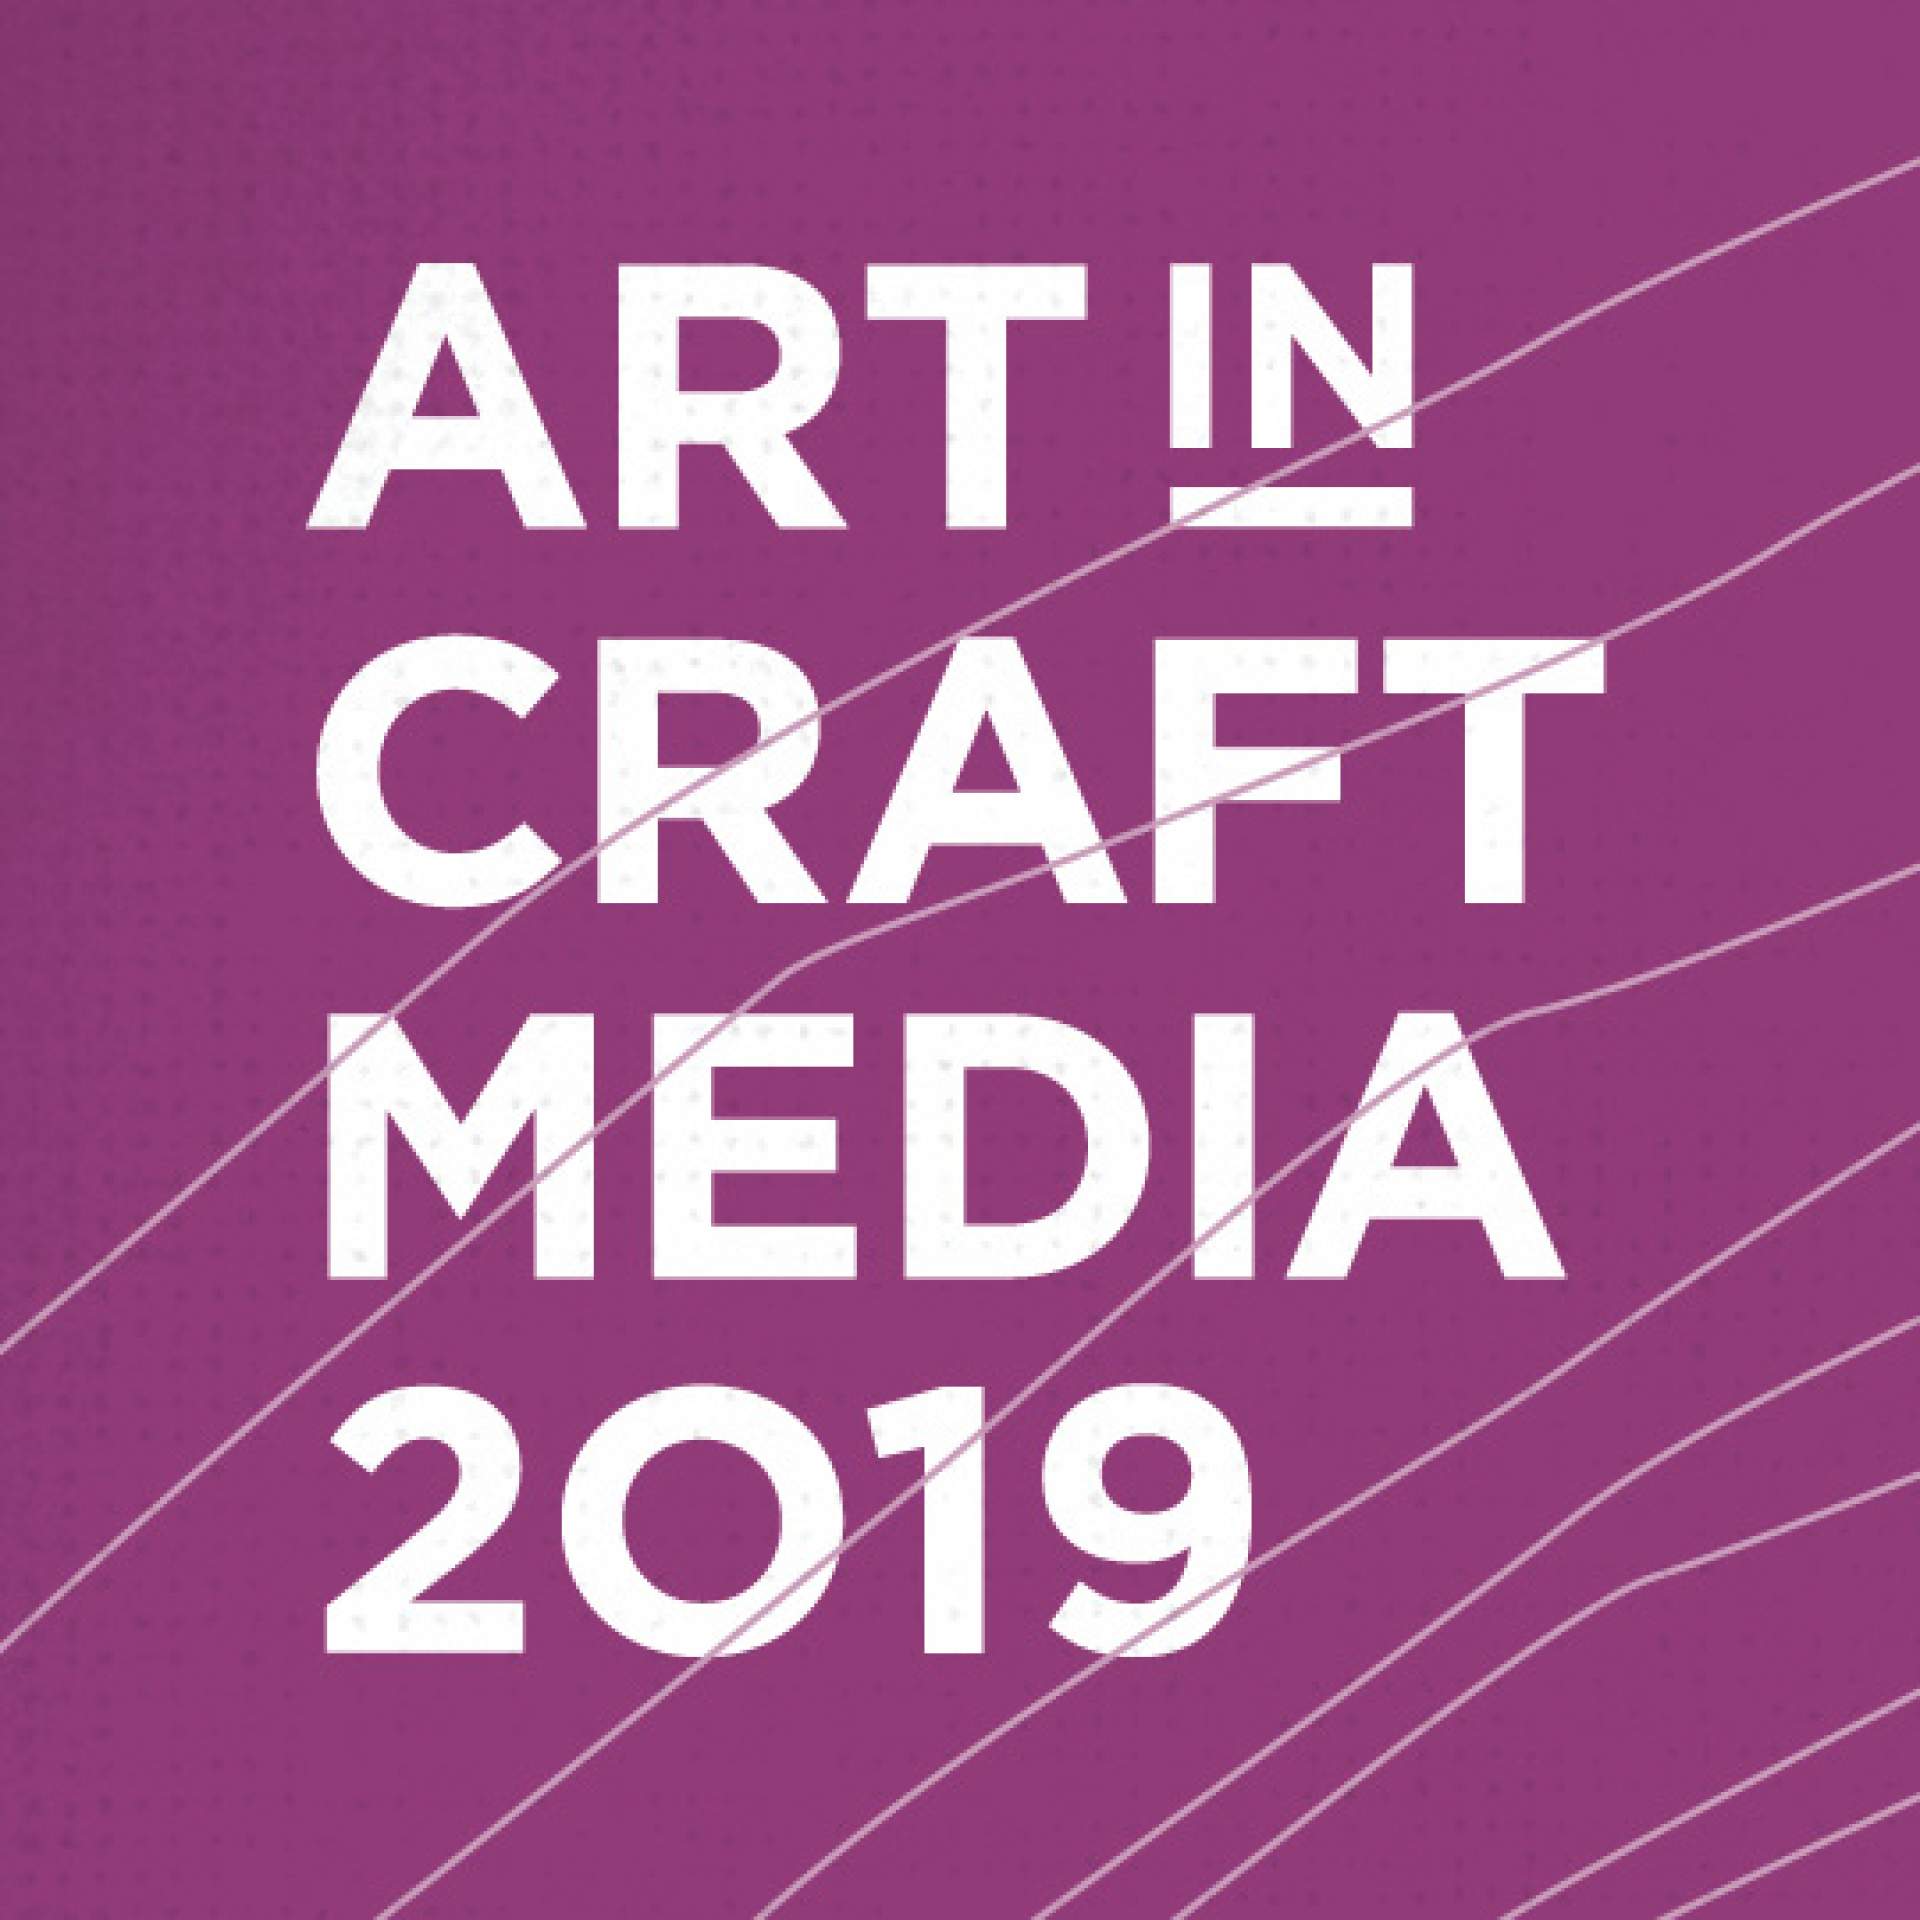 Art in Craft Media 2019 Member Reception and Tour